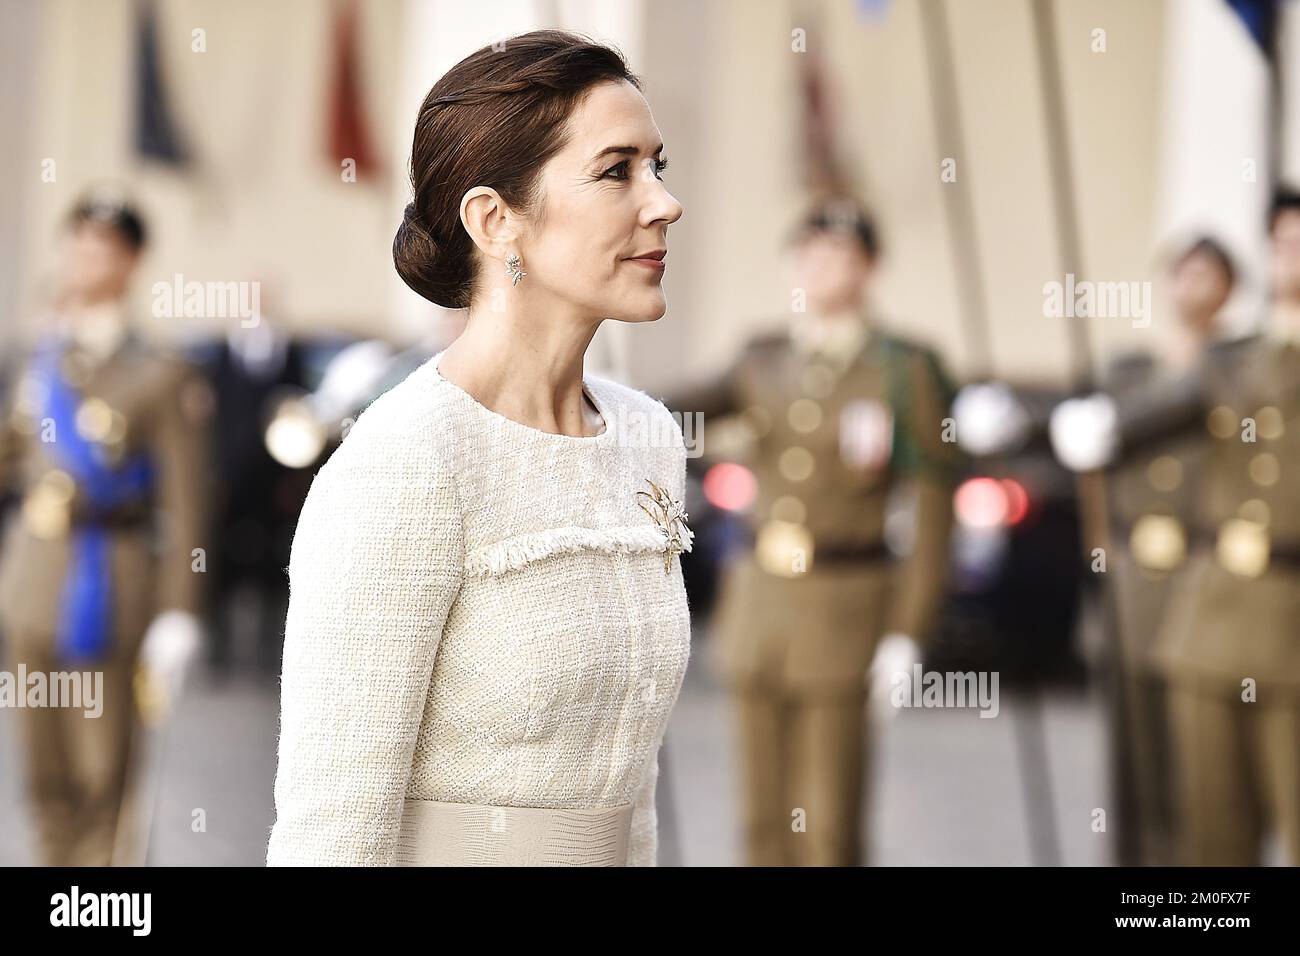 On November 6th 2018 TRH Crown Prince Frederik and Crown Princess Mary arrived in Rome with a business delegation from Denmark. One of the first points on the agenda was lunch at Palazzo del Quirinale with Italian President Sergio Mattarella and his wife Laura Mattarella. The visit lasts from November 6th to 8th and the Crown Prince Couple will attend several business and state events. Stock Photo